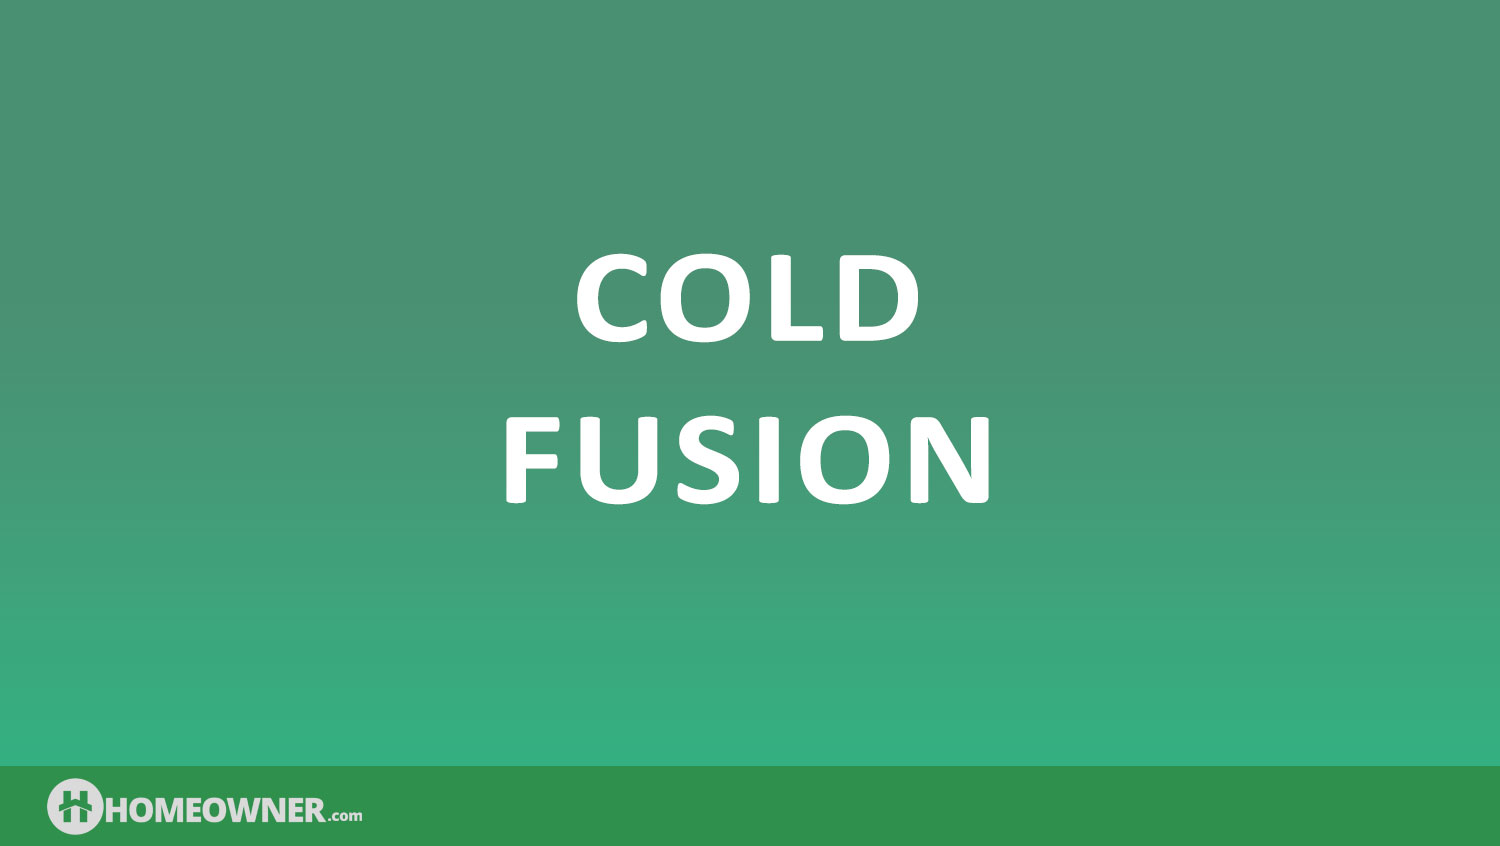 What Is Cold Fusion?